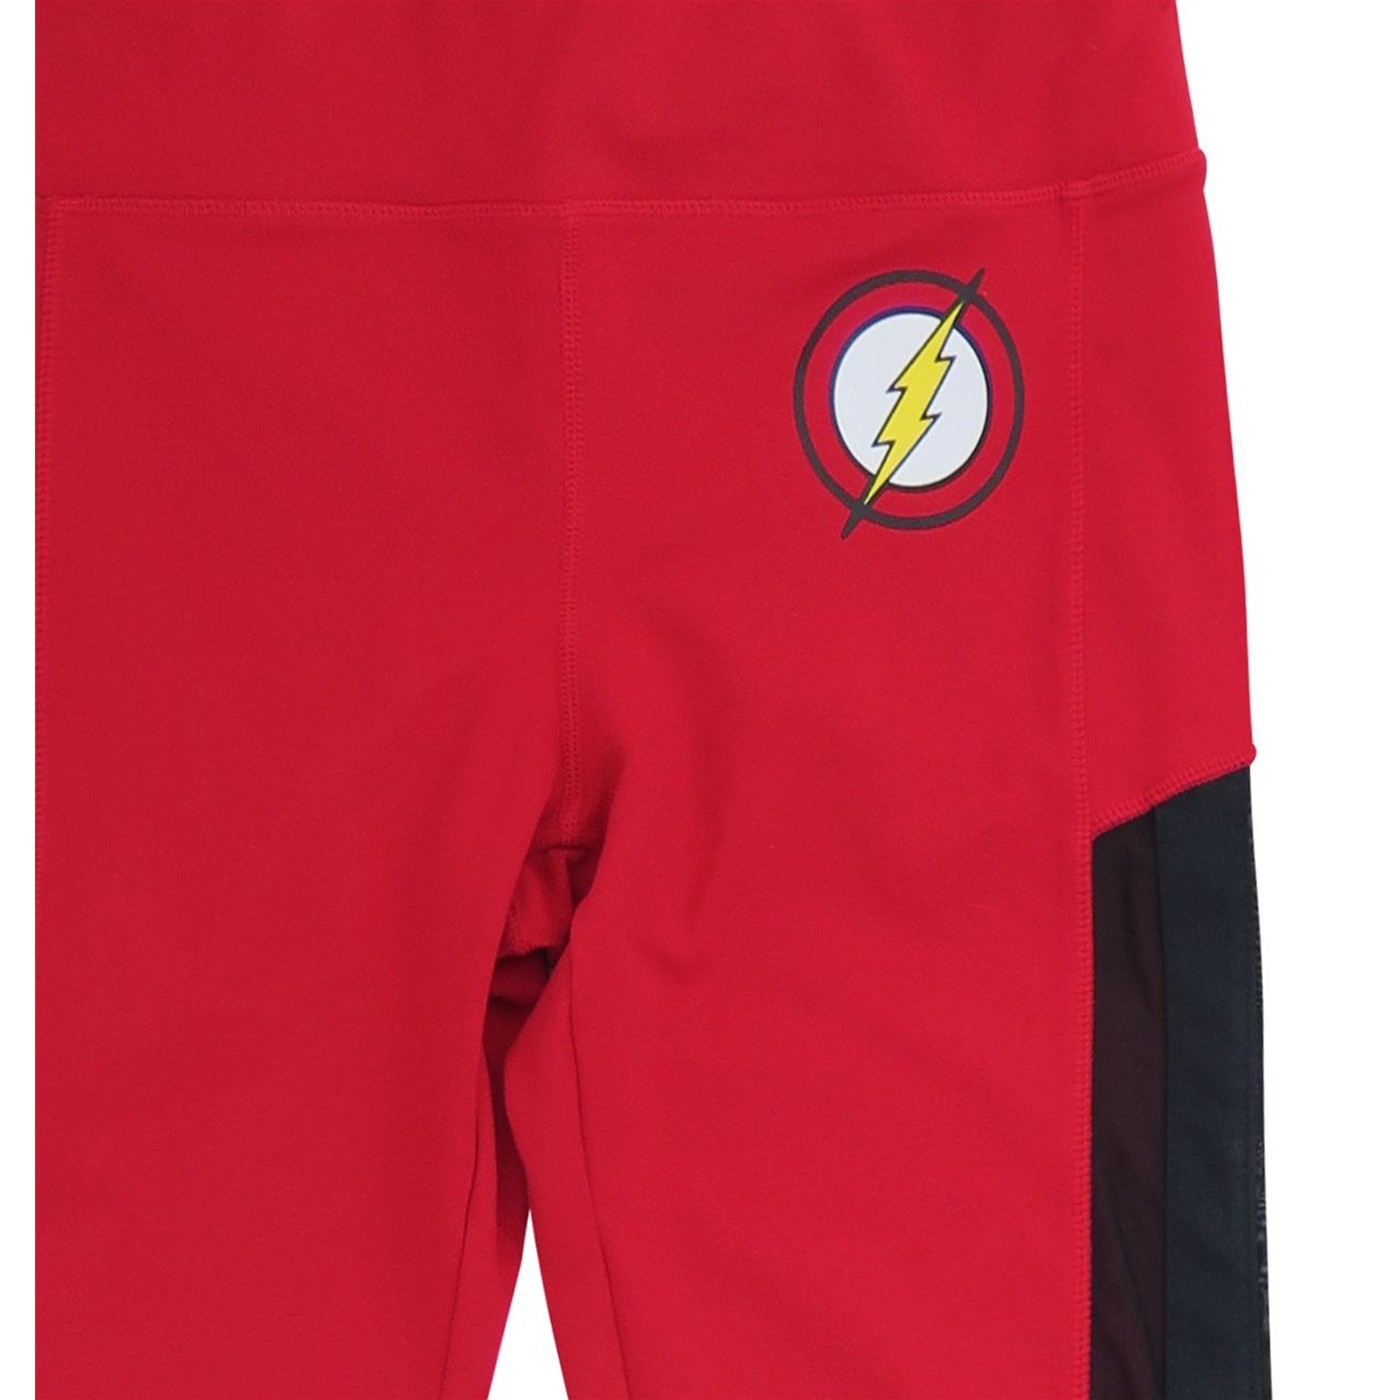 Flash Symbol Active Leggings with Mesh Sides